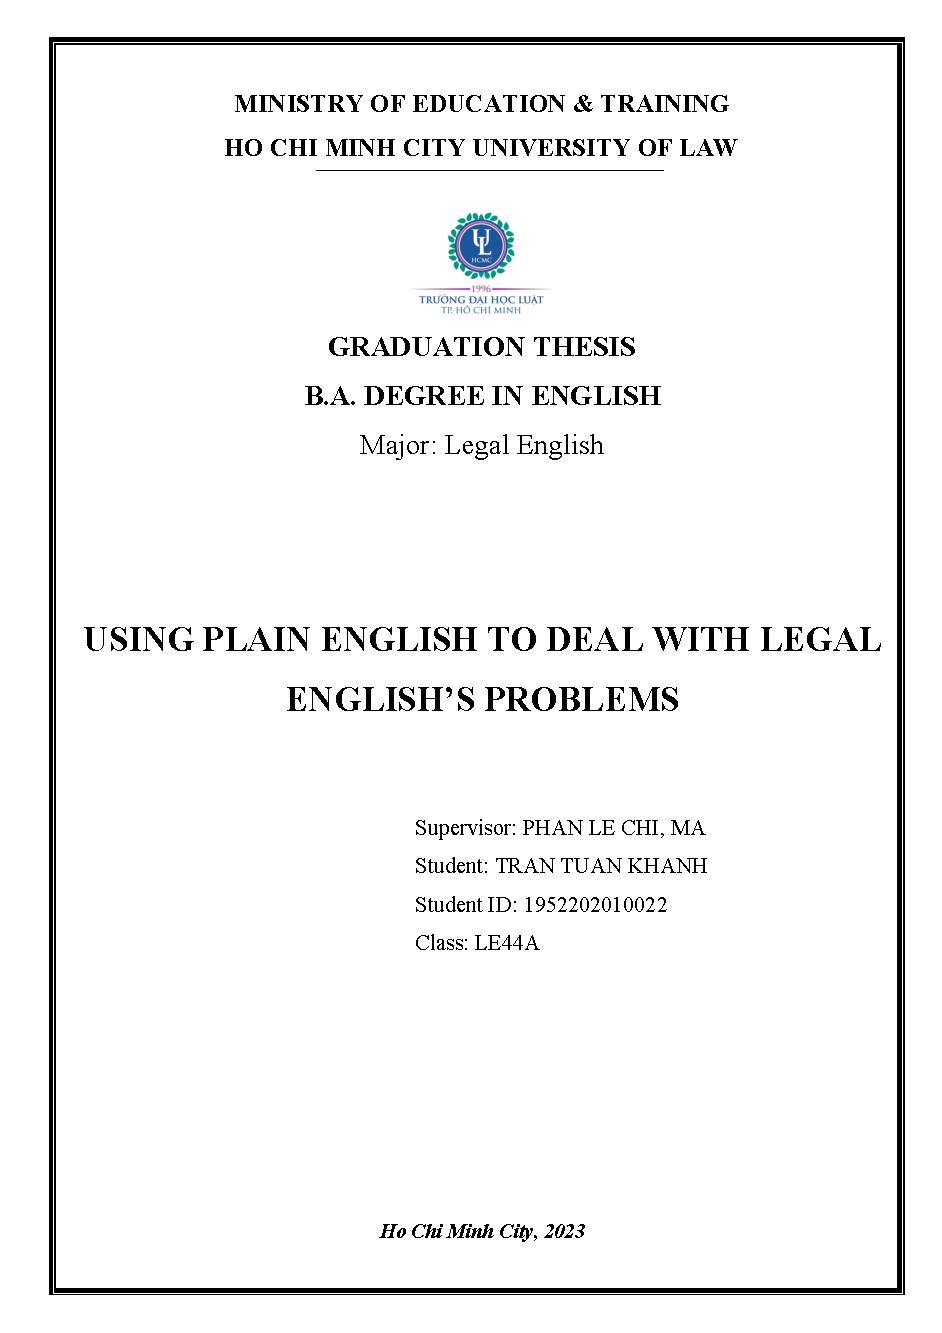 Using Plain English To Deal With Legal English’s Problems